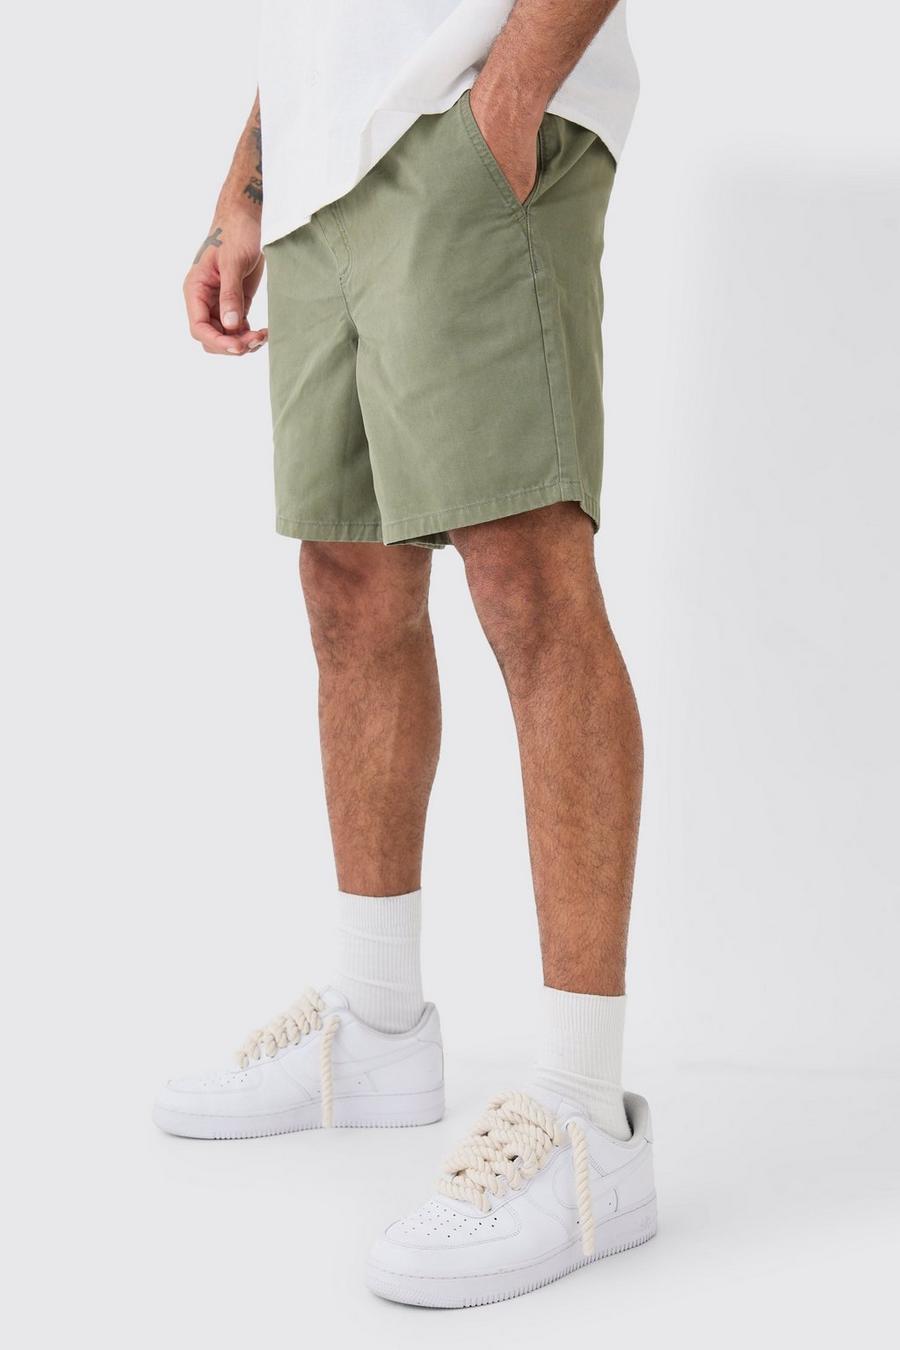 Shorter Length Relaxed Fit Elasticated Waist Chino Shorts in Khaki